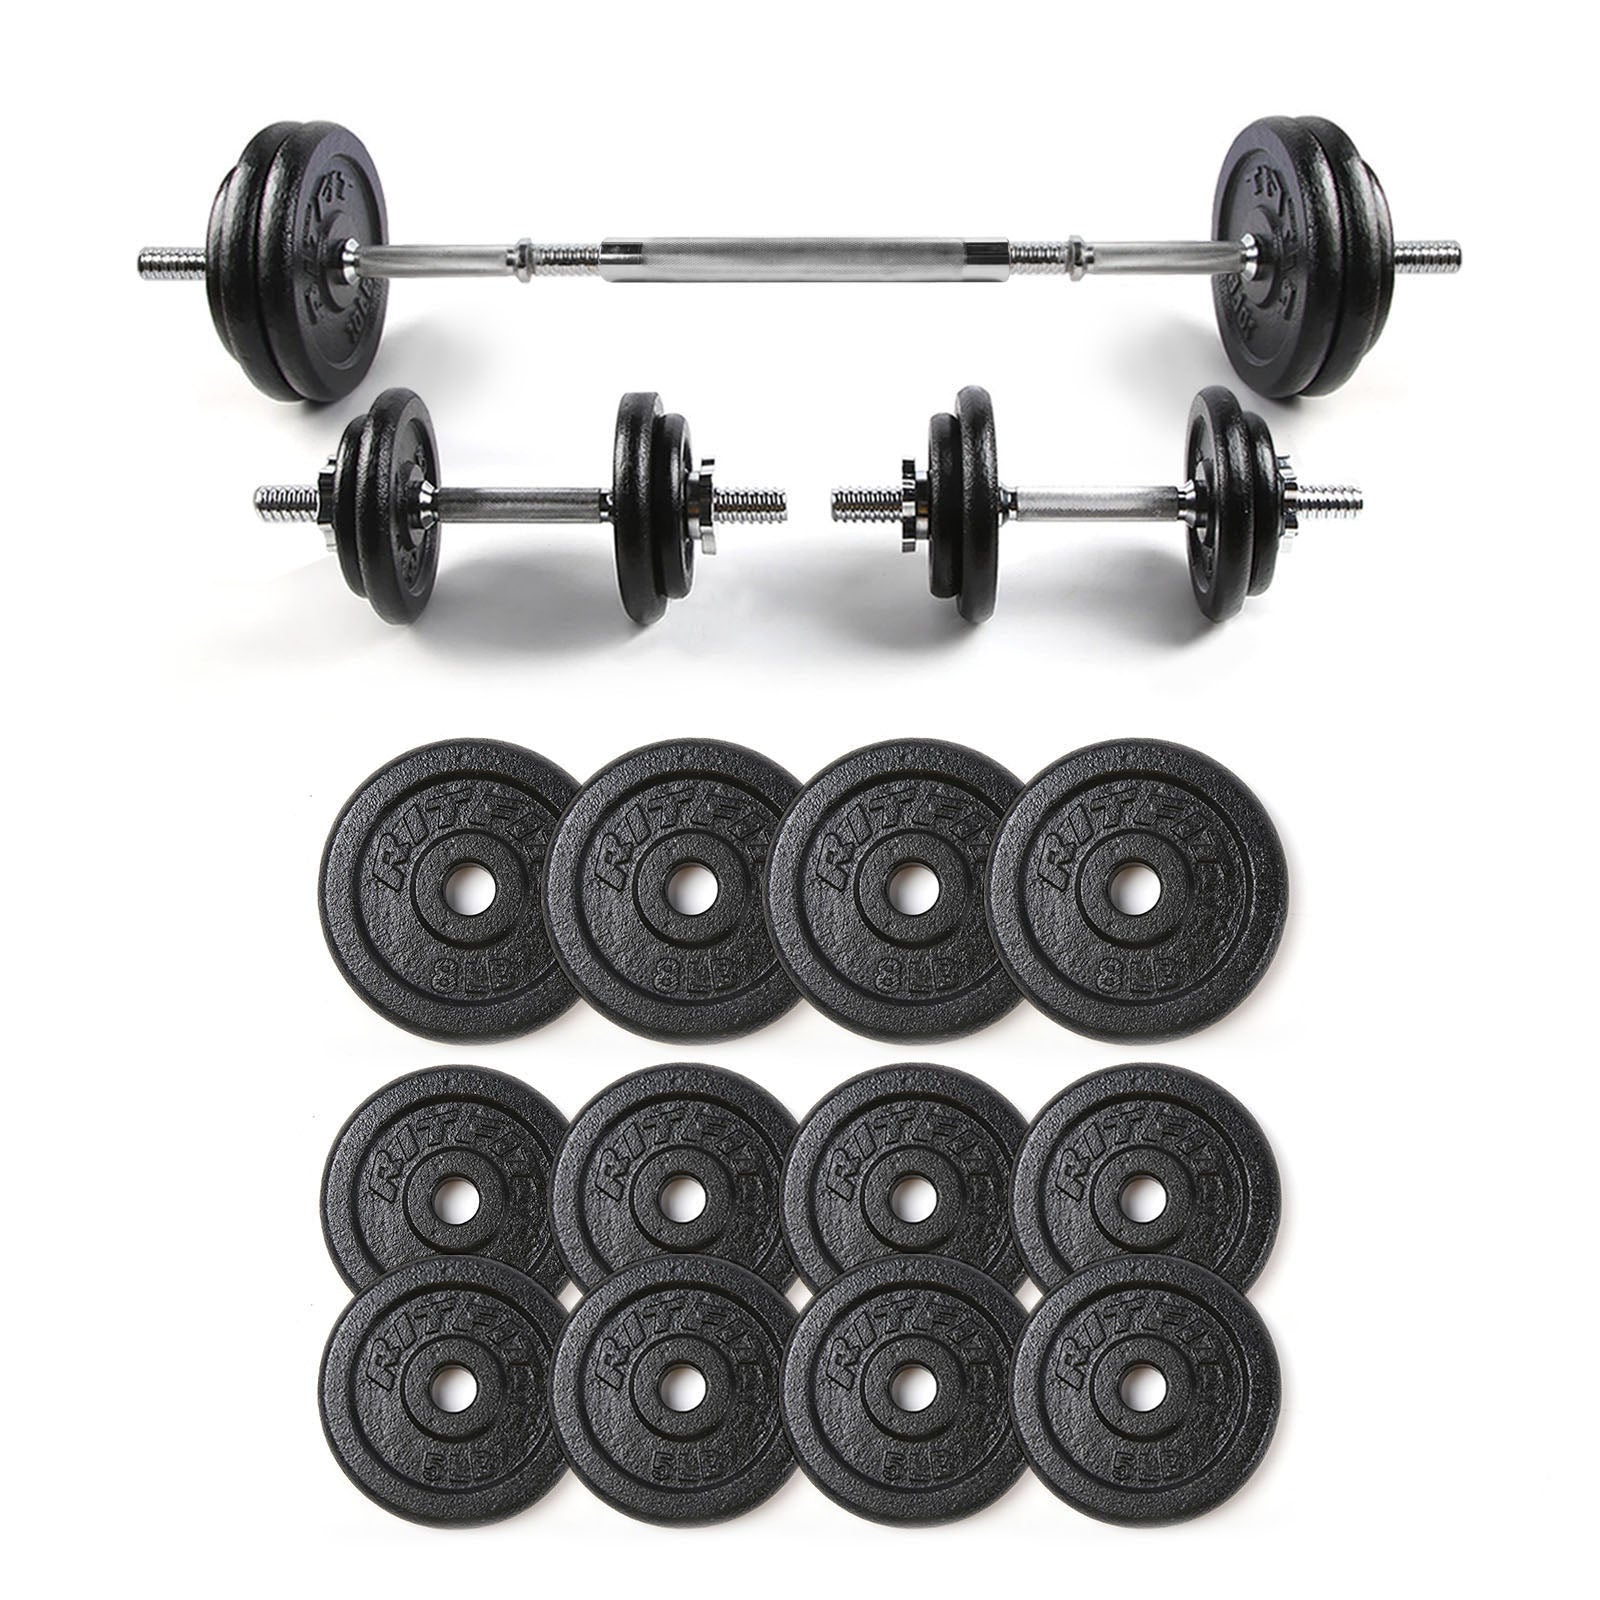 RitFit Cast Iron Adjustable Dumbbells 80LBS Set with Connector